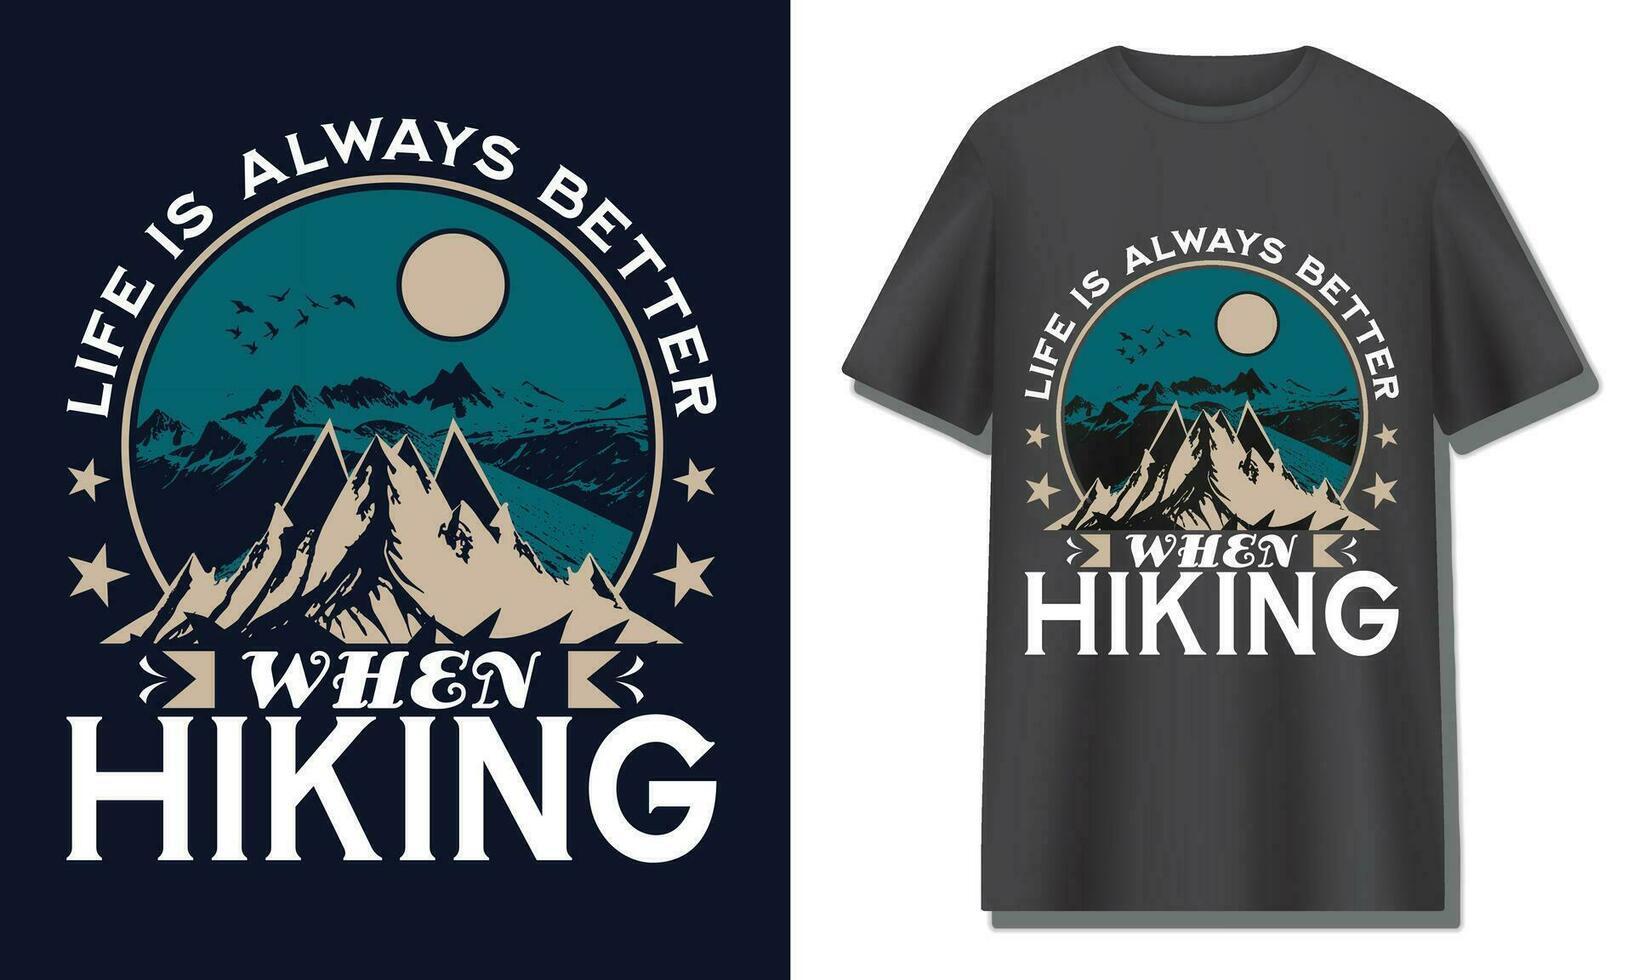 LIFE IS ALWAYS BETTER WHEN HIKING, Hiking t shirt design vector